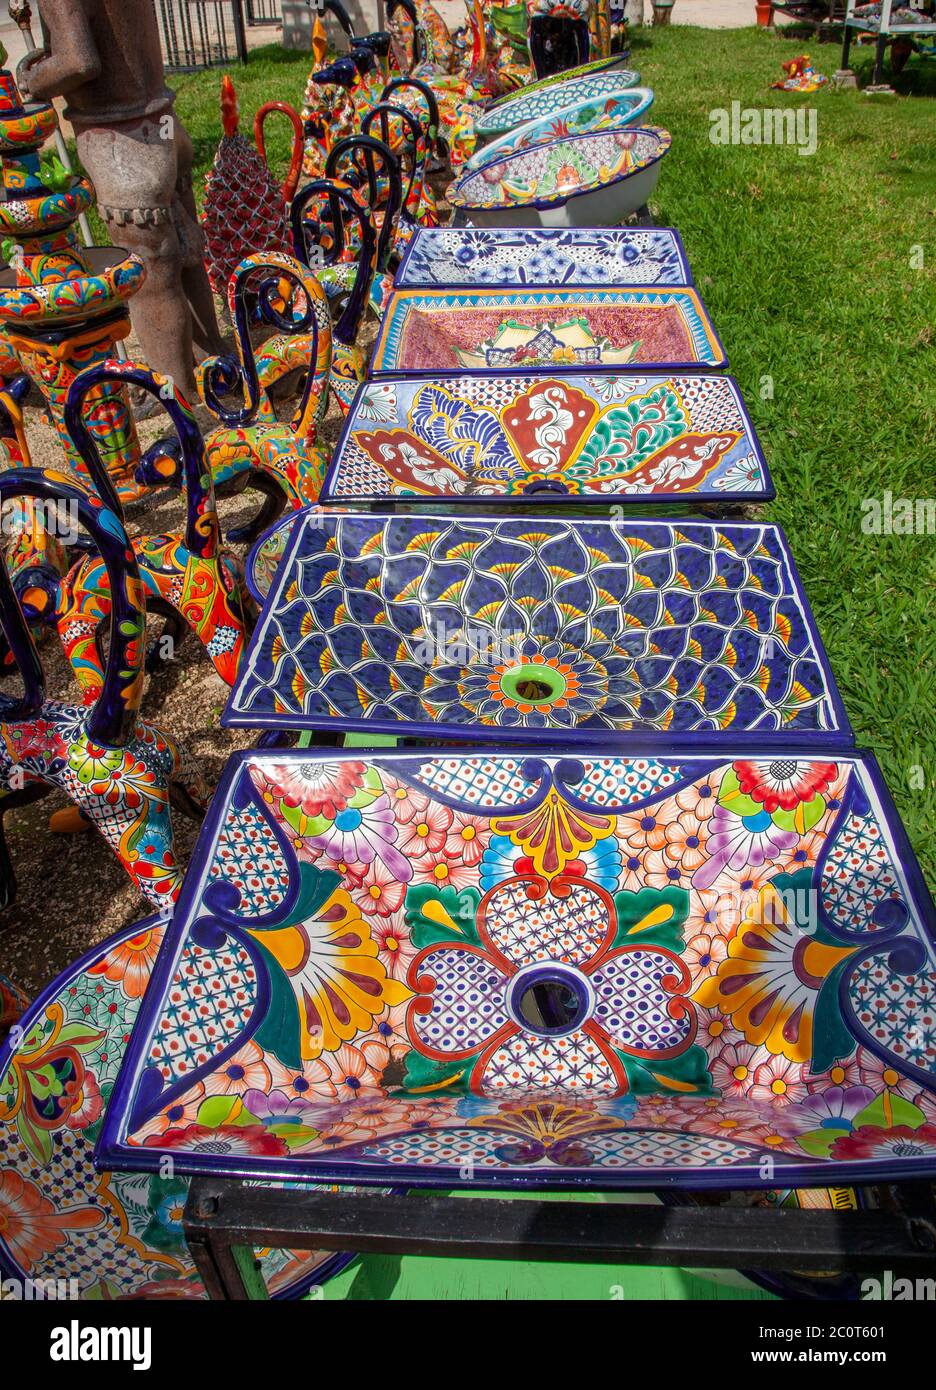 Talavera sinks nudge a collection of Talavera monkeys at Sr.Tequila's Artesanias and Crafts, a tourist stopper on the Tulum-Coba Road in Francisco Uh Stock Photo